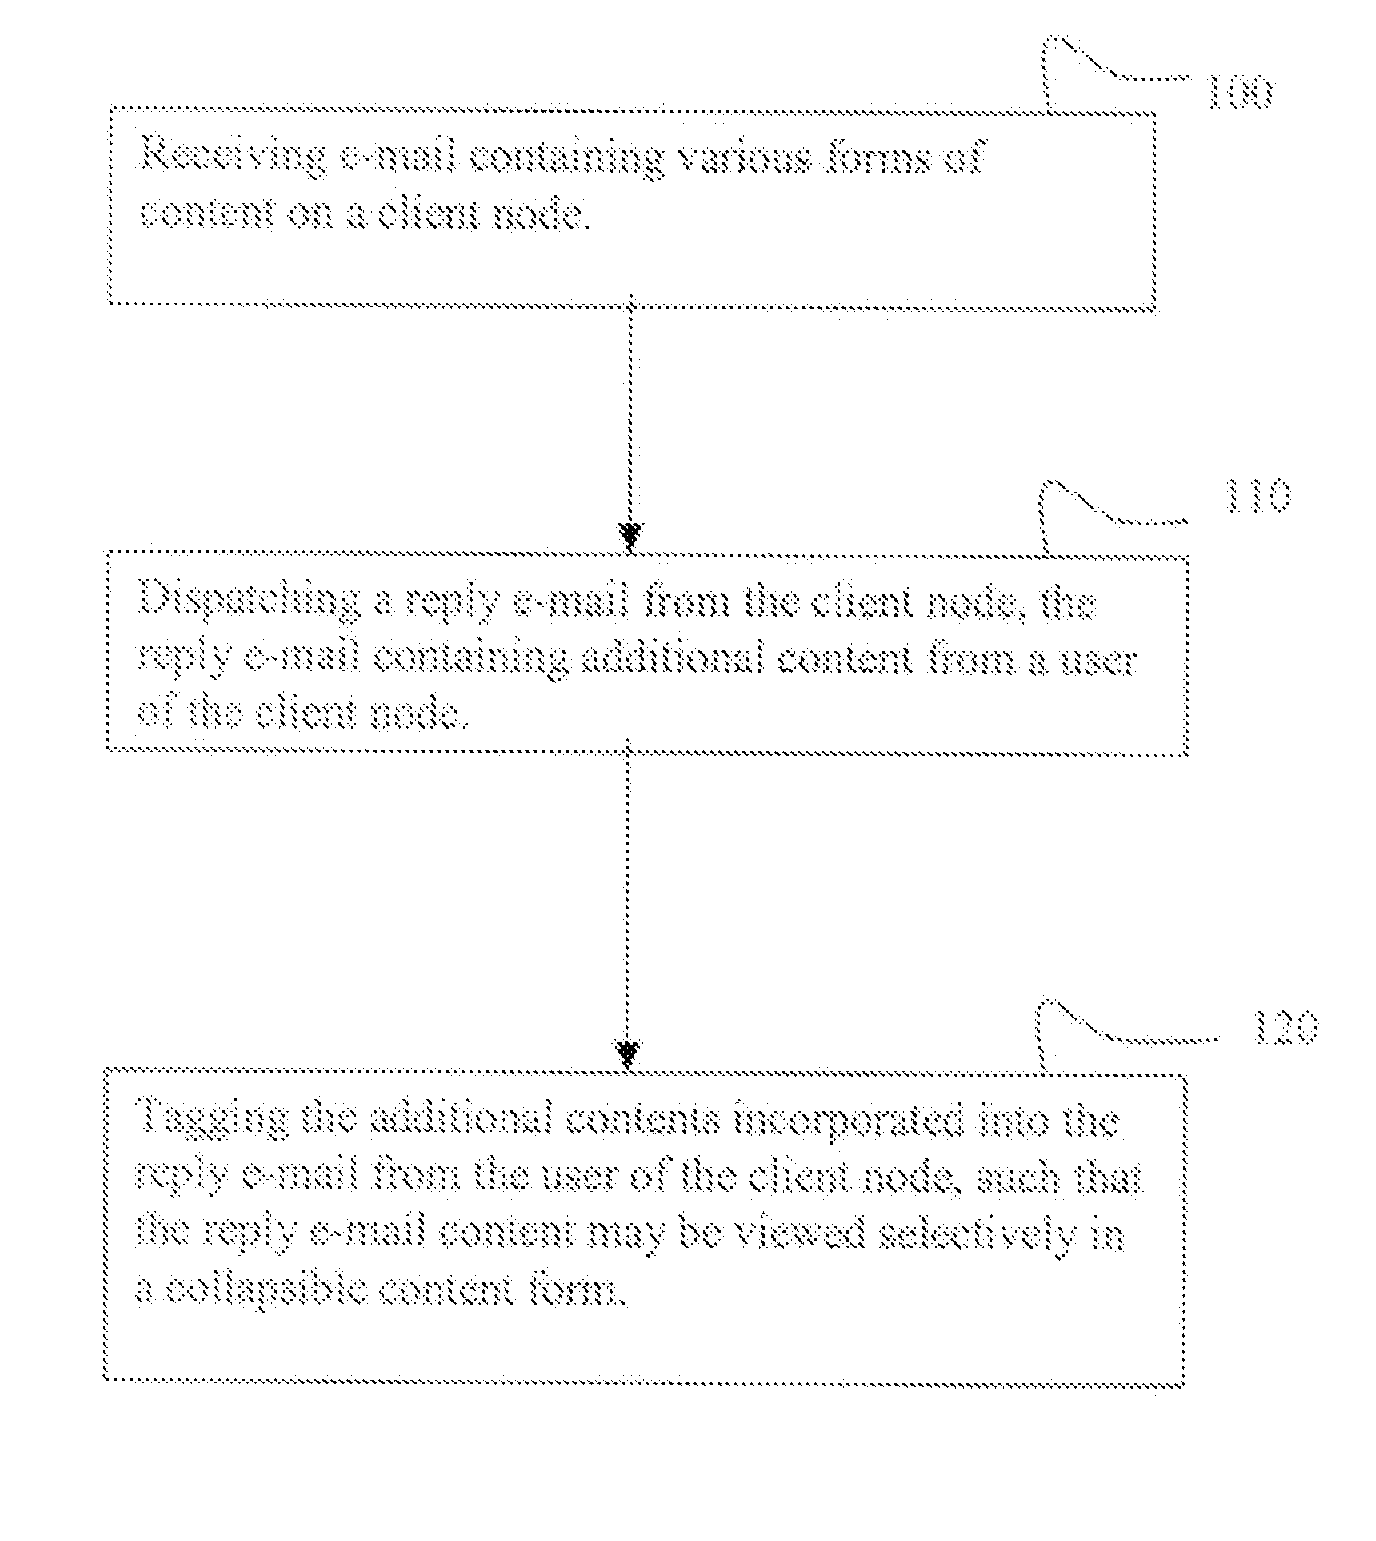 Method to color tag e-mail content containing multiple replies to ease reading